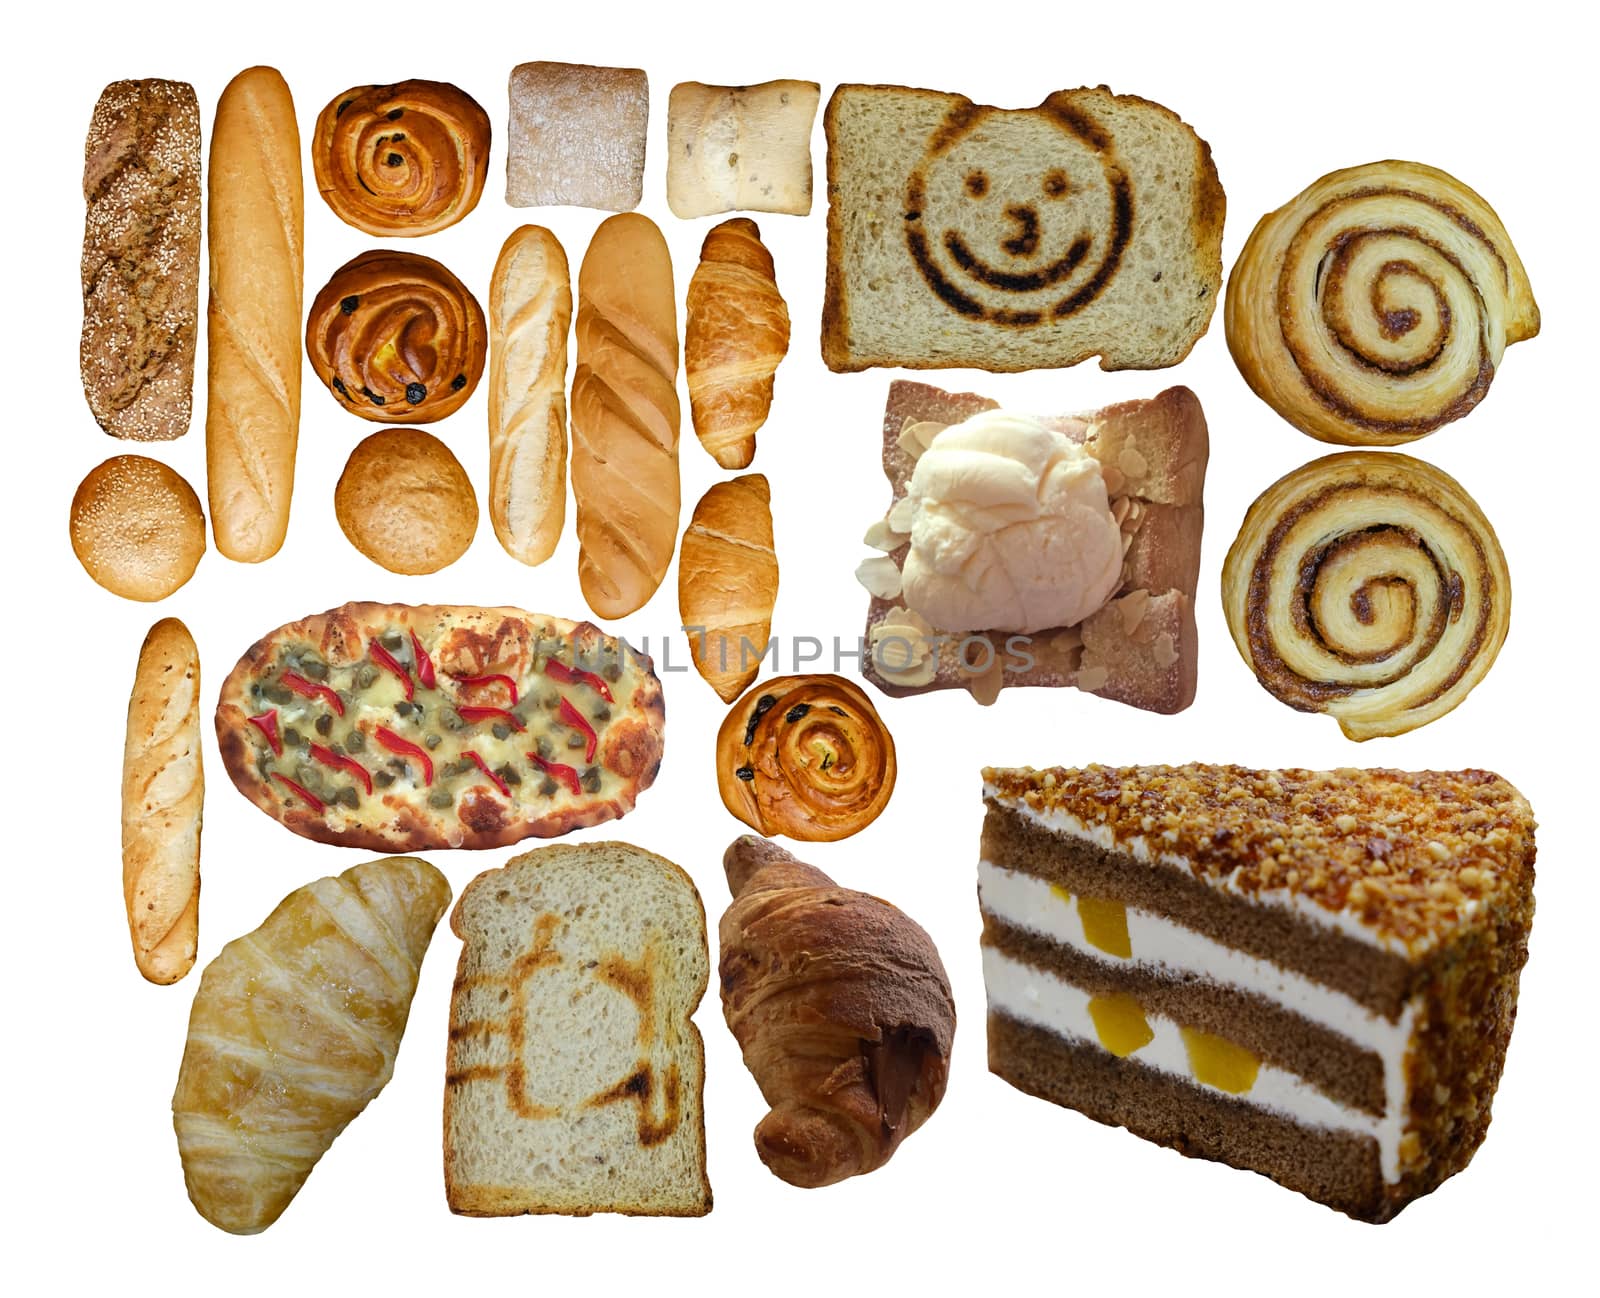  Collection of fresh bakery, pastry, cakes and bread  by Margolana